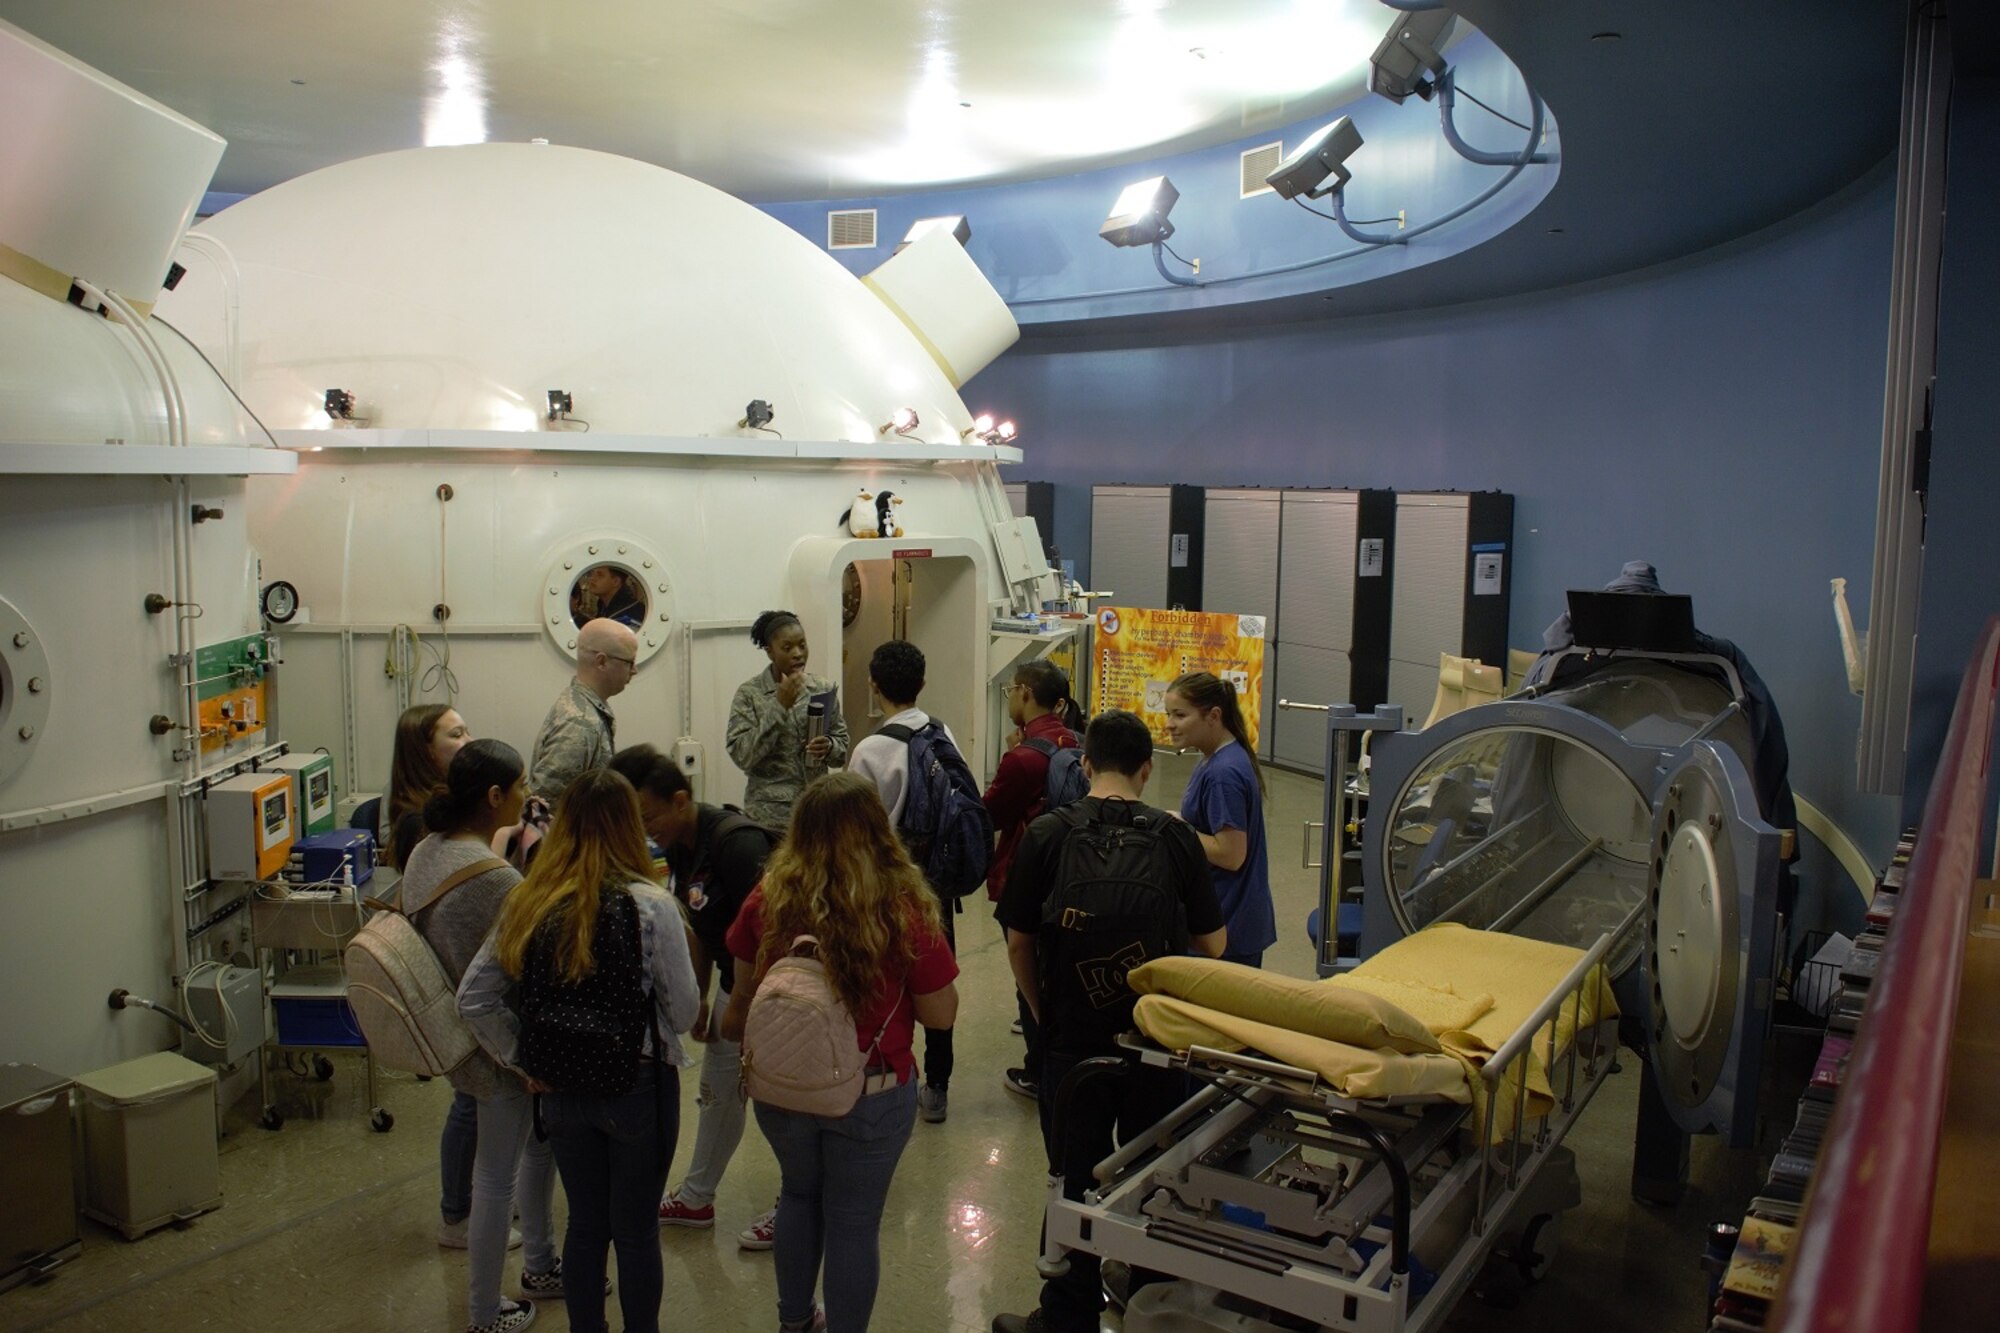 Students from De Anza High School tour the hyperbaric chamber at David Grant USAF Medical Center March 29 at Travis Air Force Base, Calif. The students attended the tour to have a work-based understanding of the workings of an operating hospital.